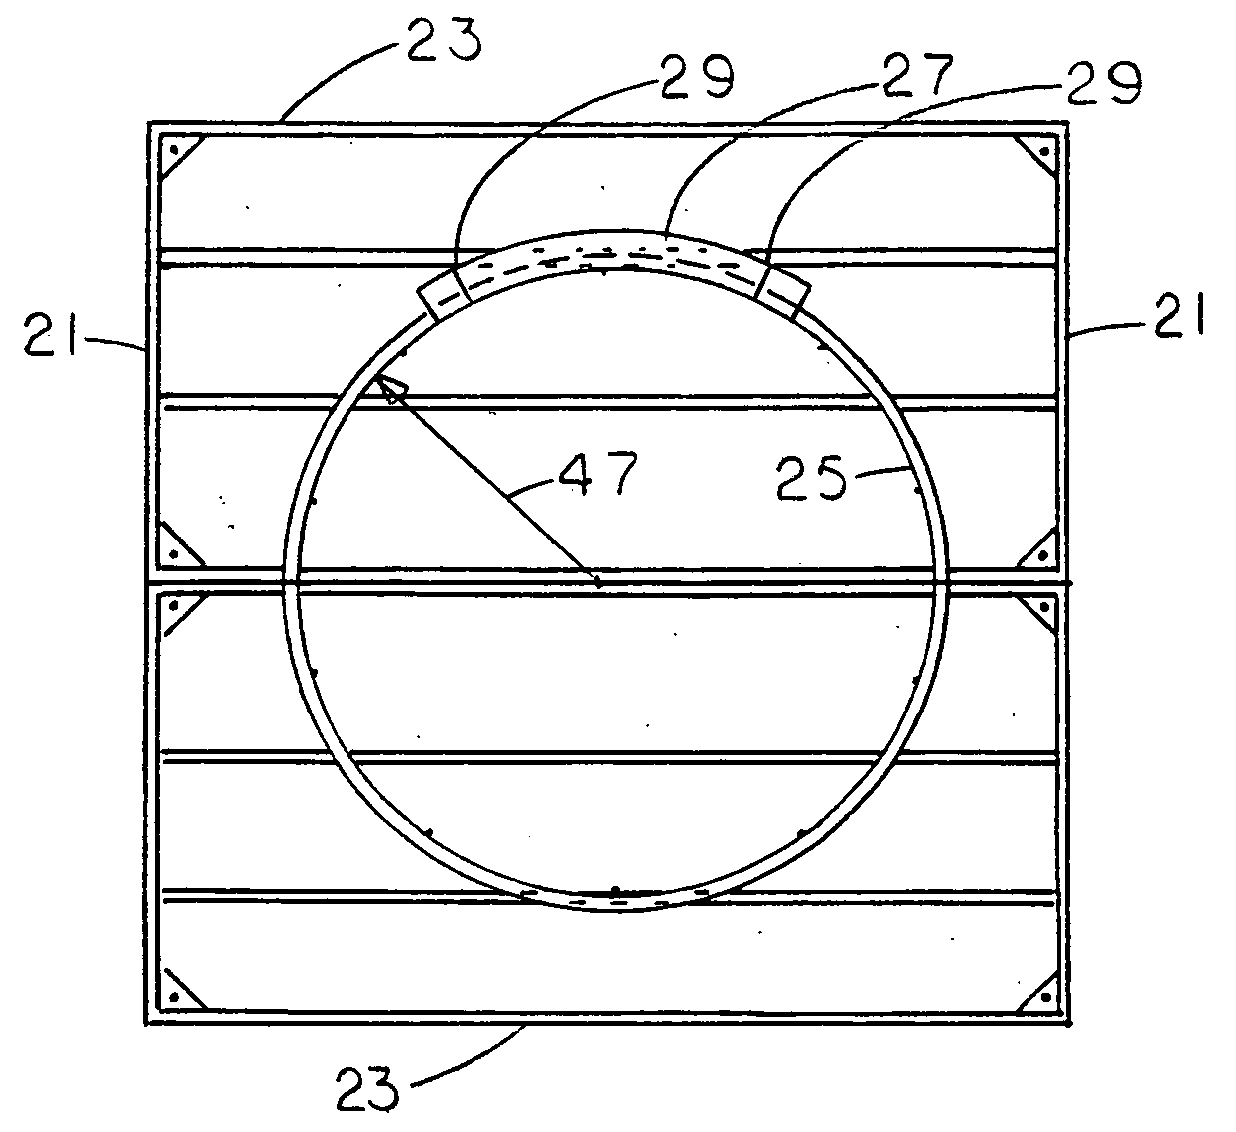 Form for constructing a thrower's circle